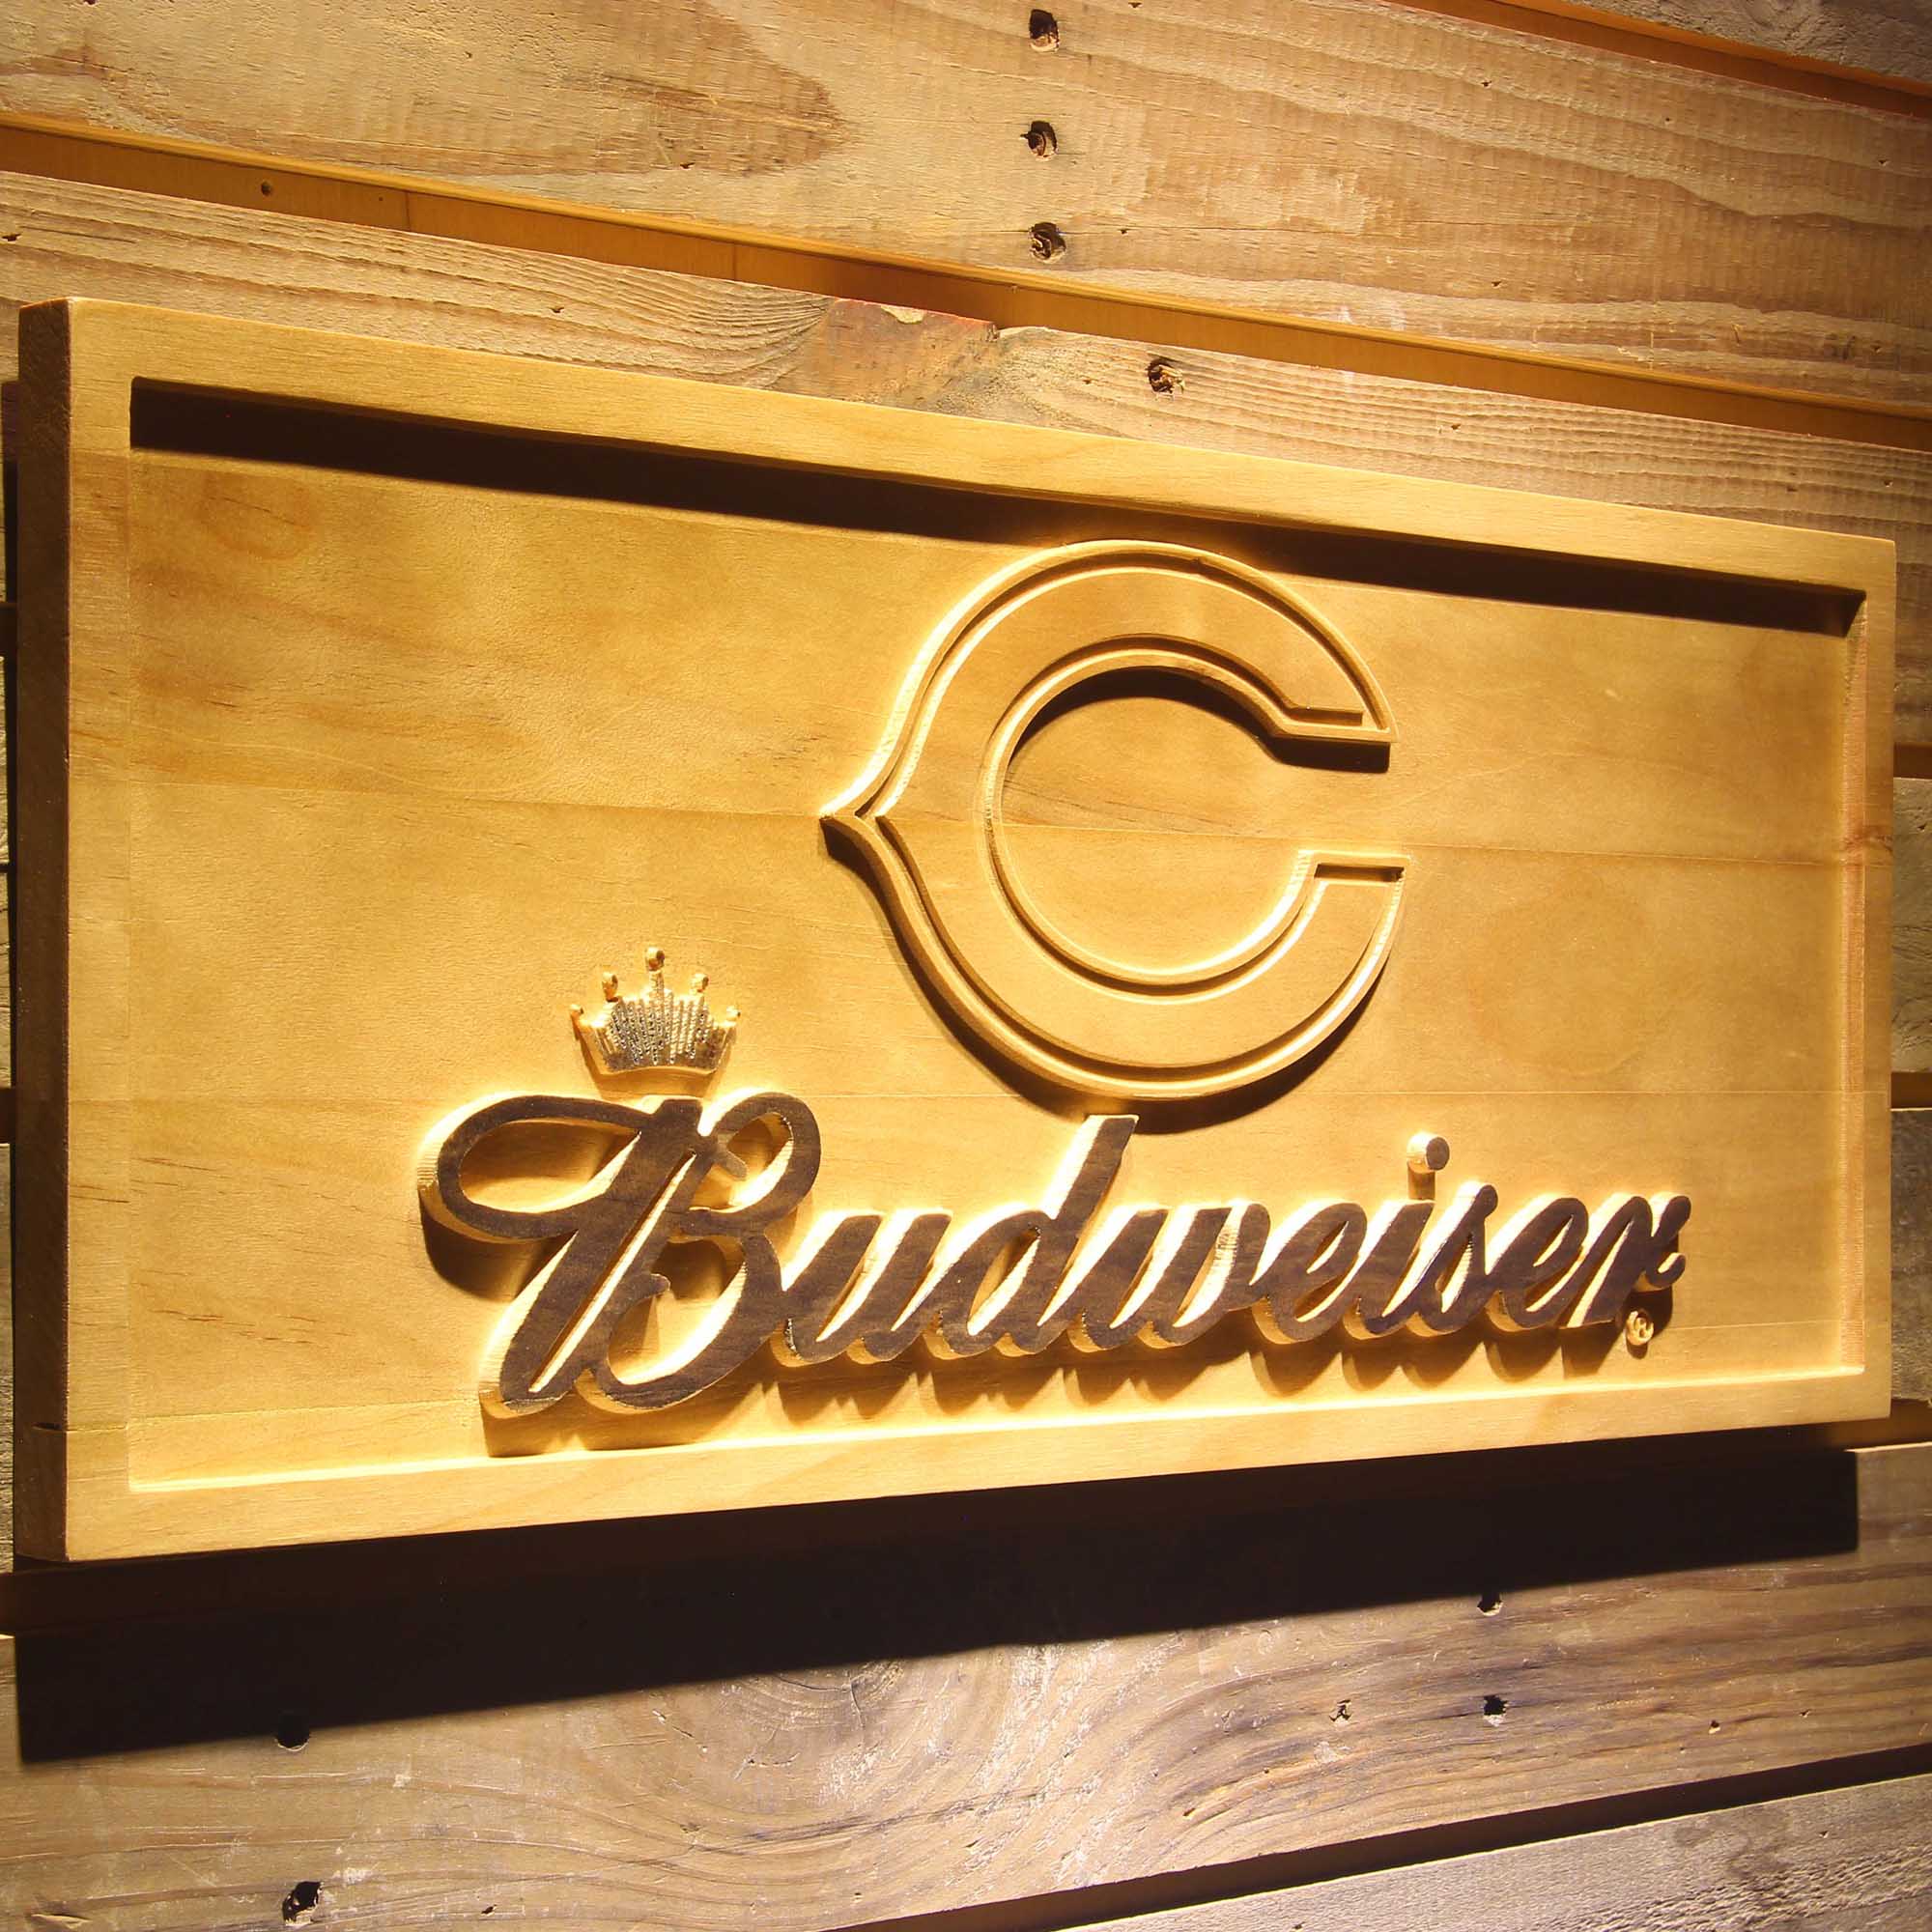 Chicago Bears Budweiser 3D Solid Wooden Craving Sign